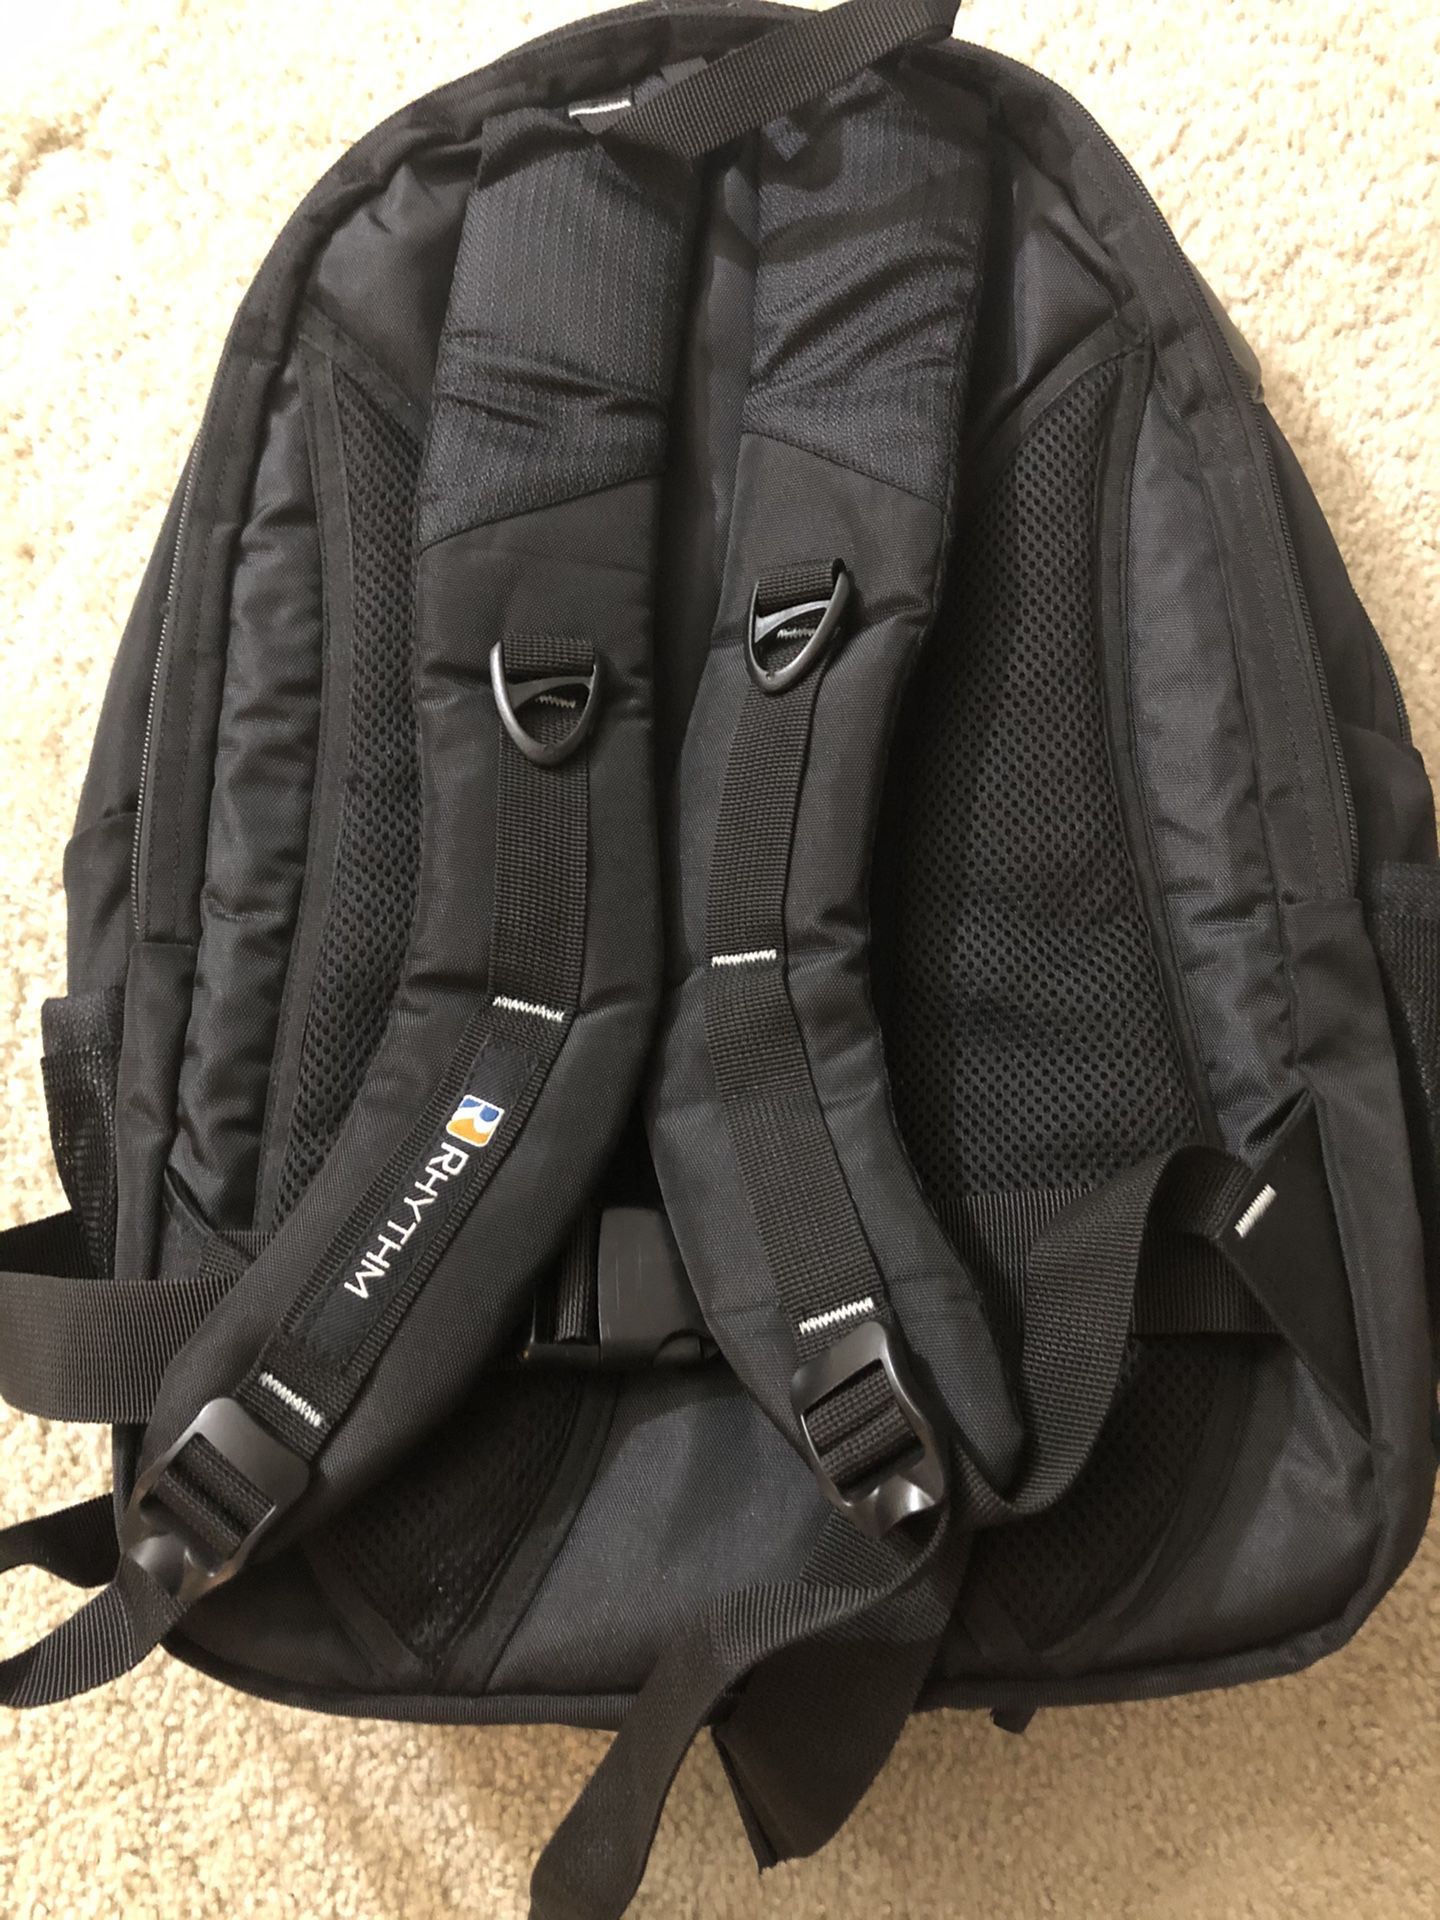 Laptop backpack unopened, brand new